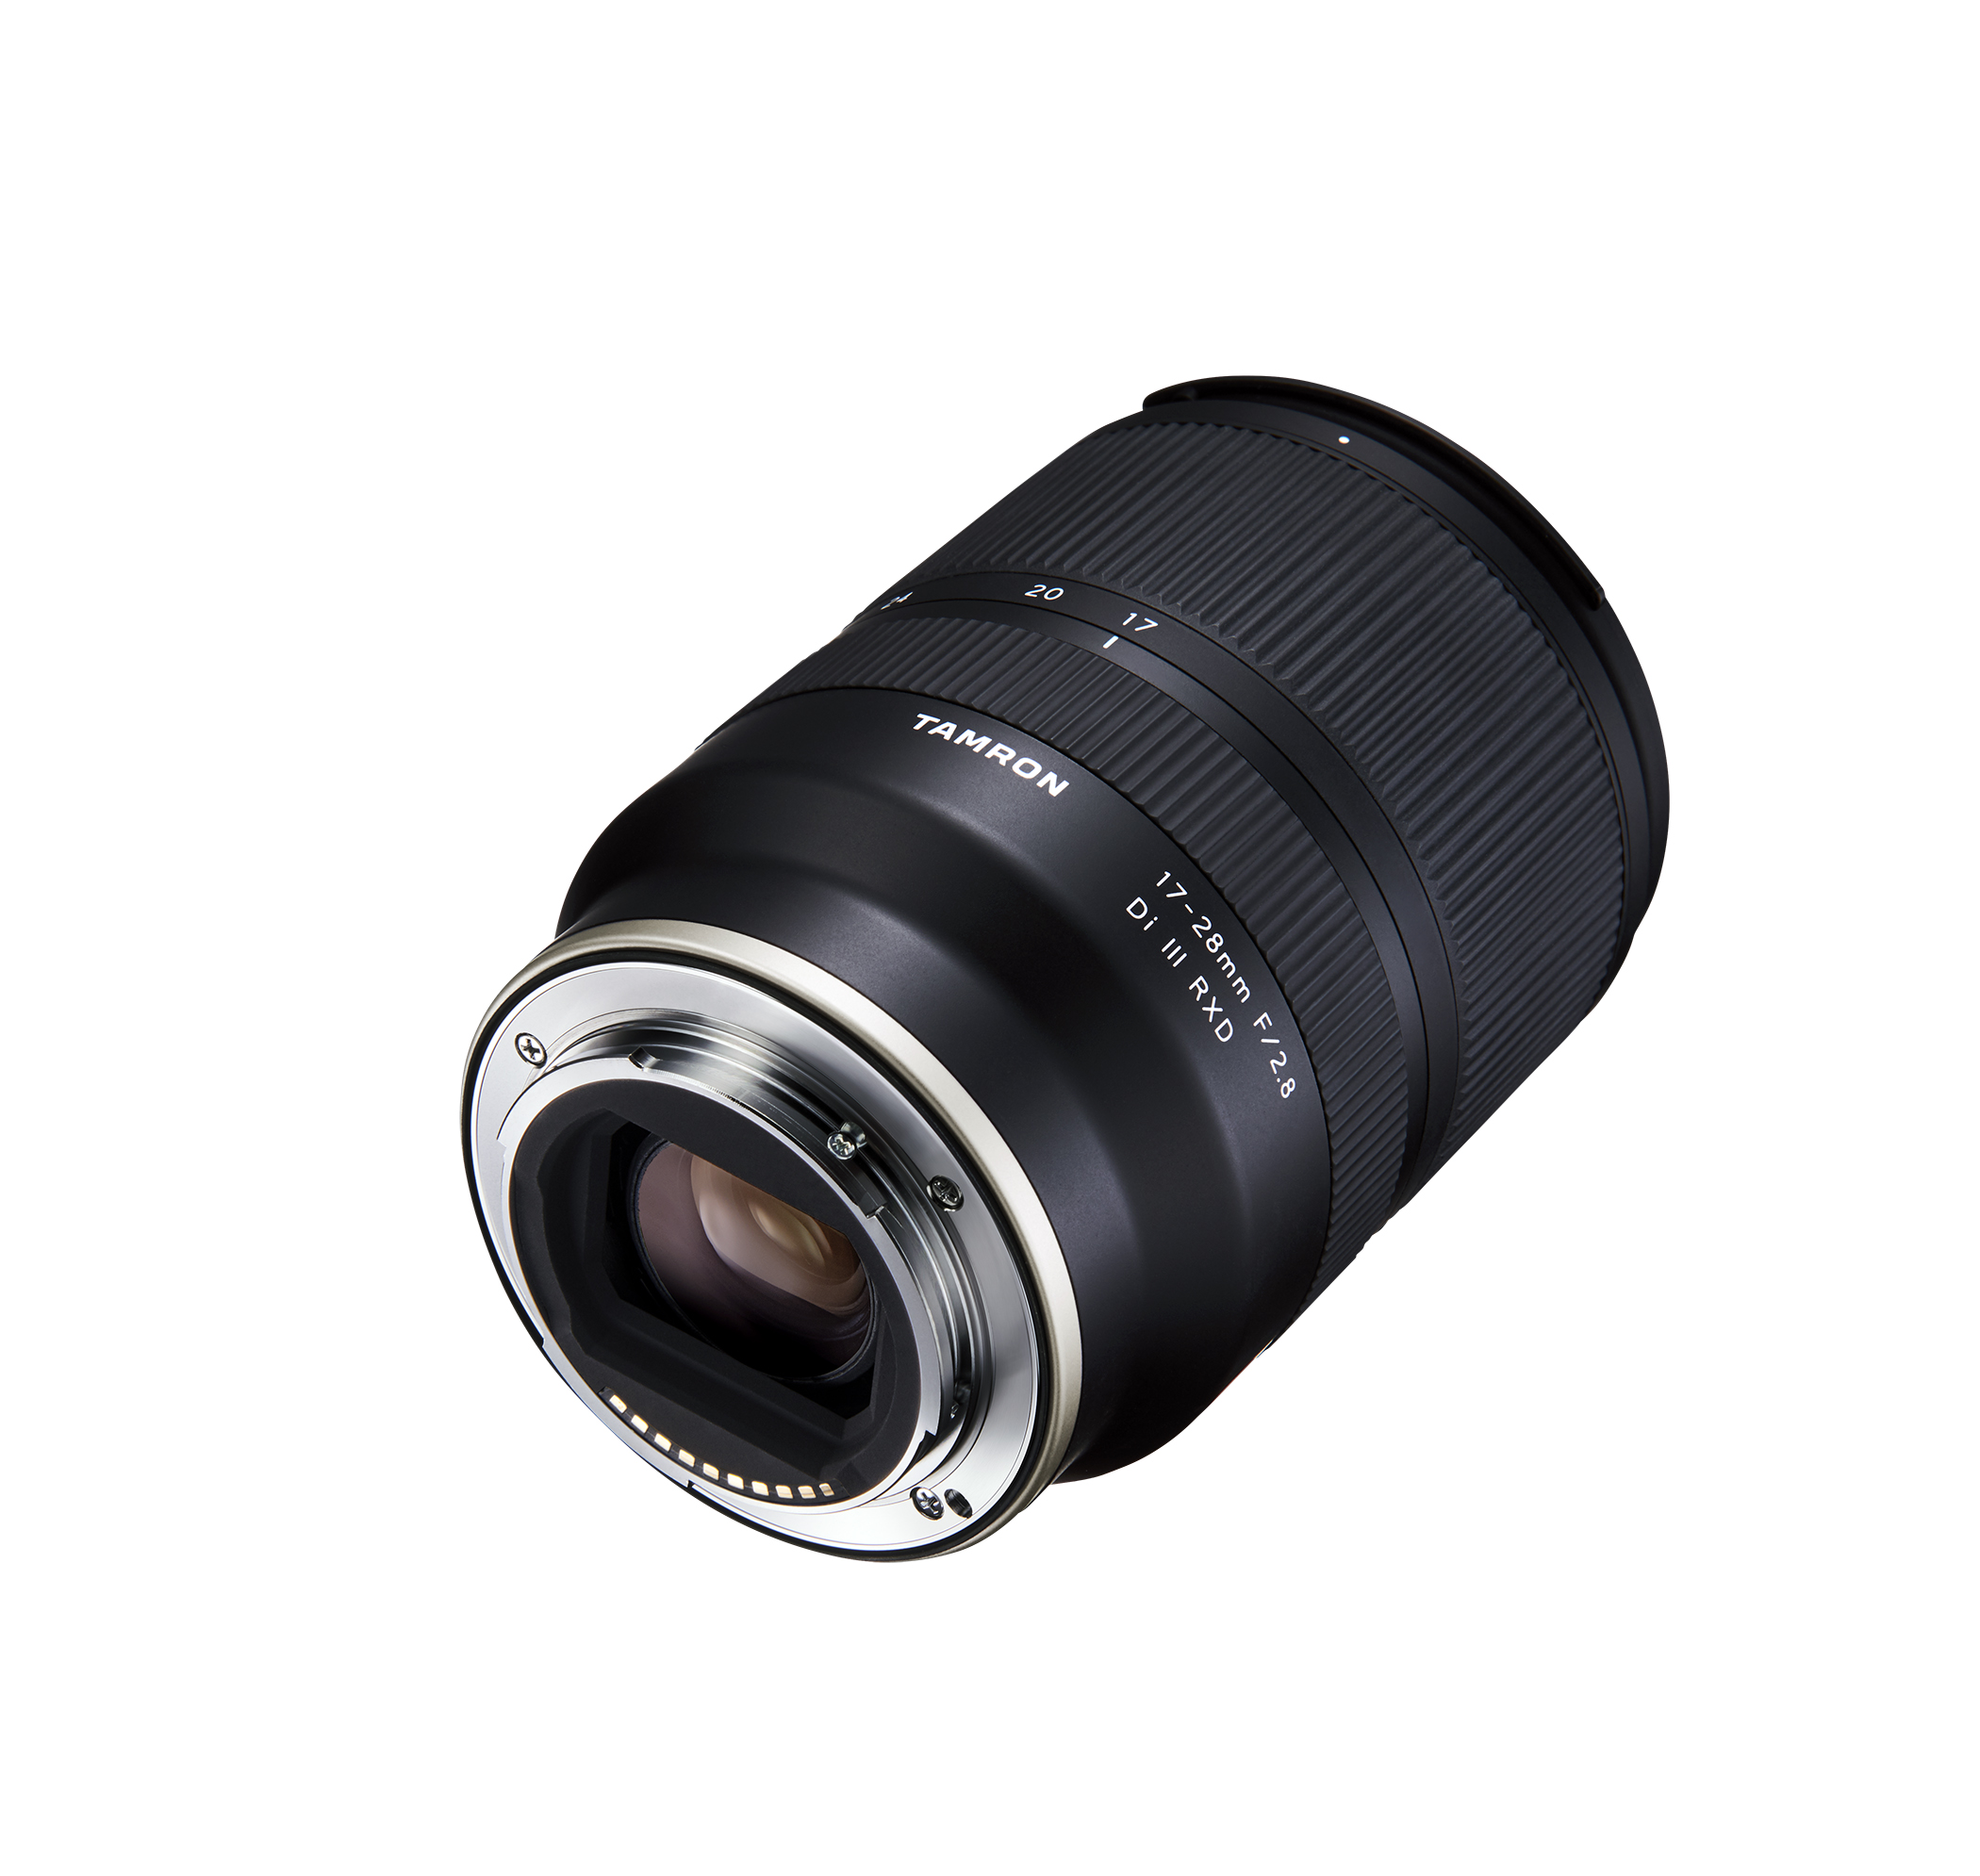 Tamron 17-28mm F/2.8 Di III RXD for Sony E mount | St. Cloud 